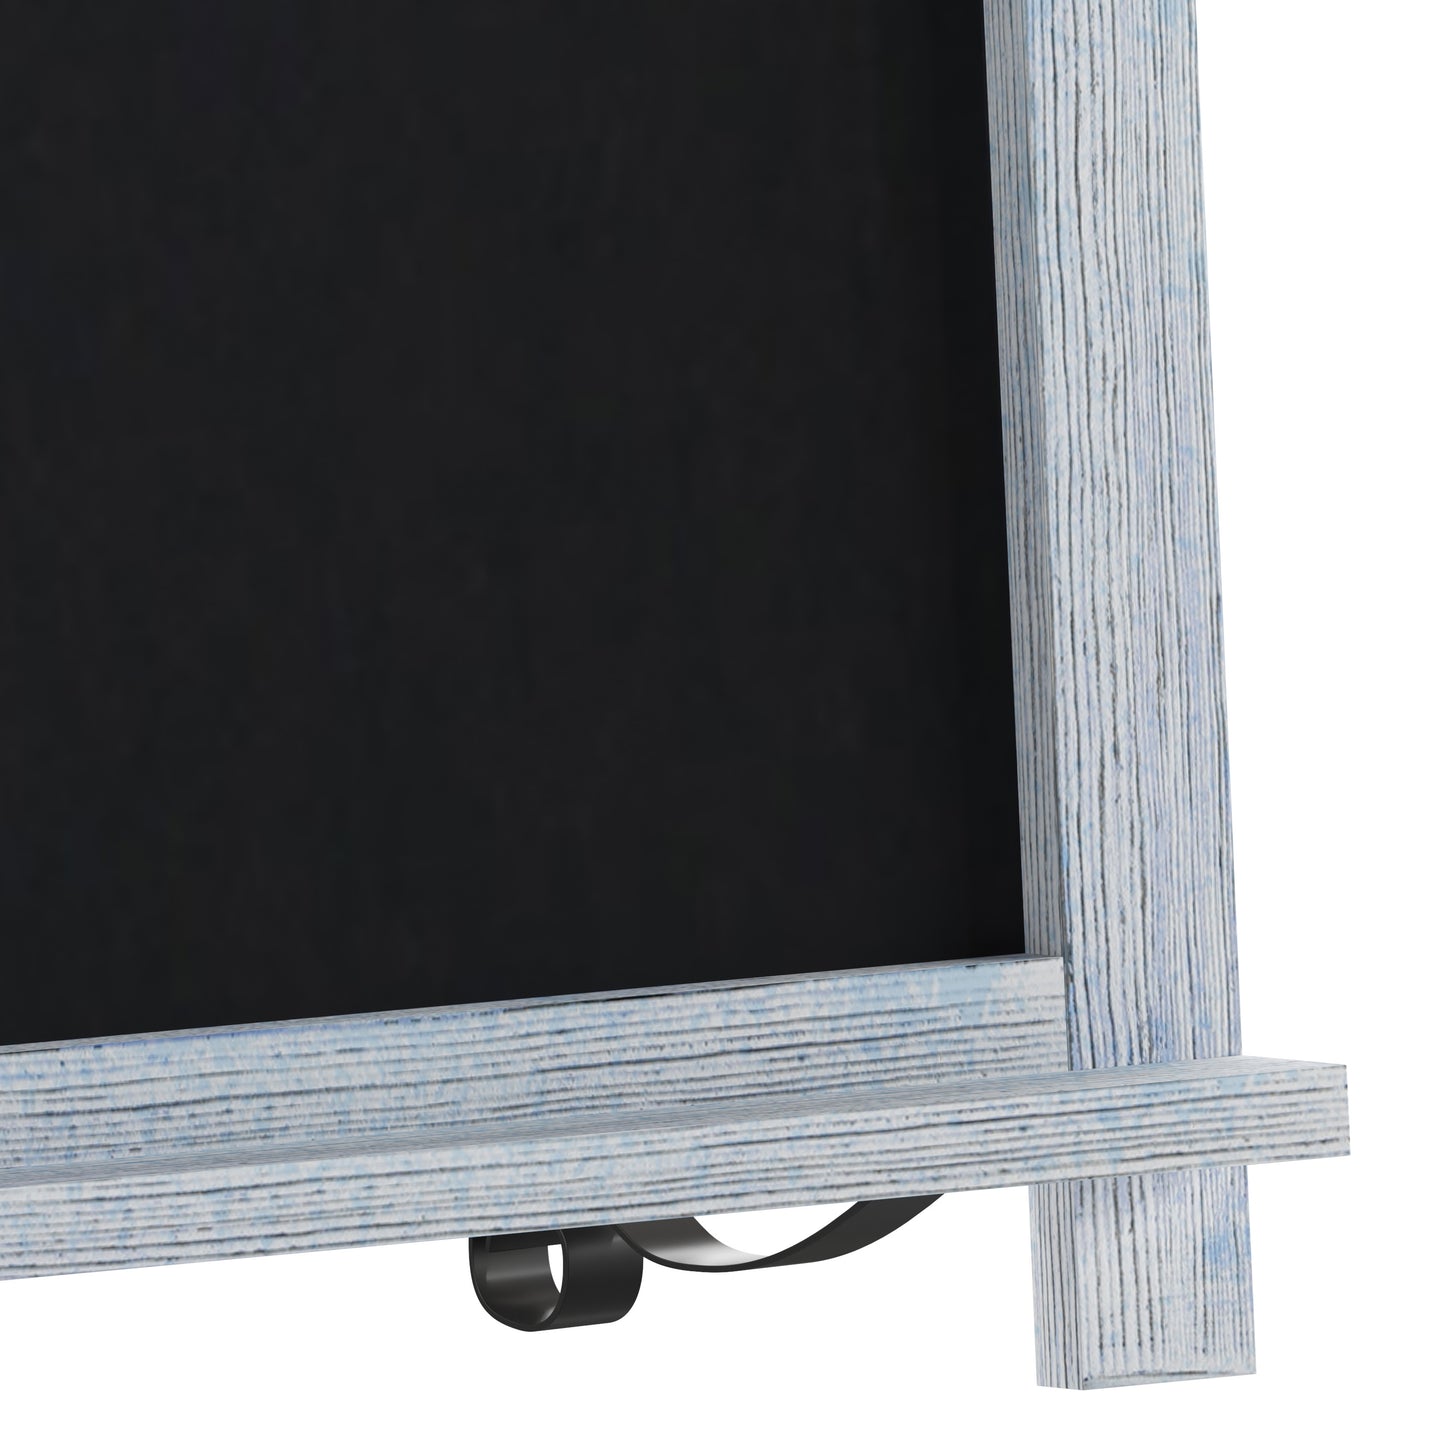 10PK Rustic Blue Chalkboards 10-HFKHD-GDIS-CRE8-422315-GG